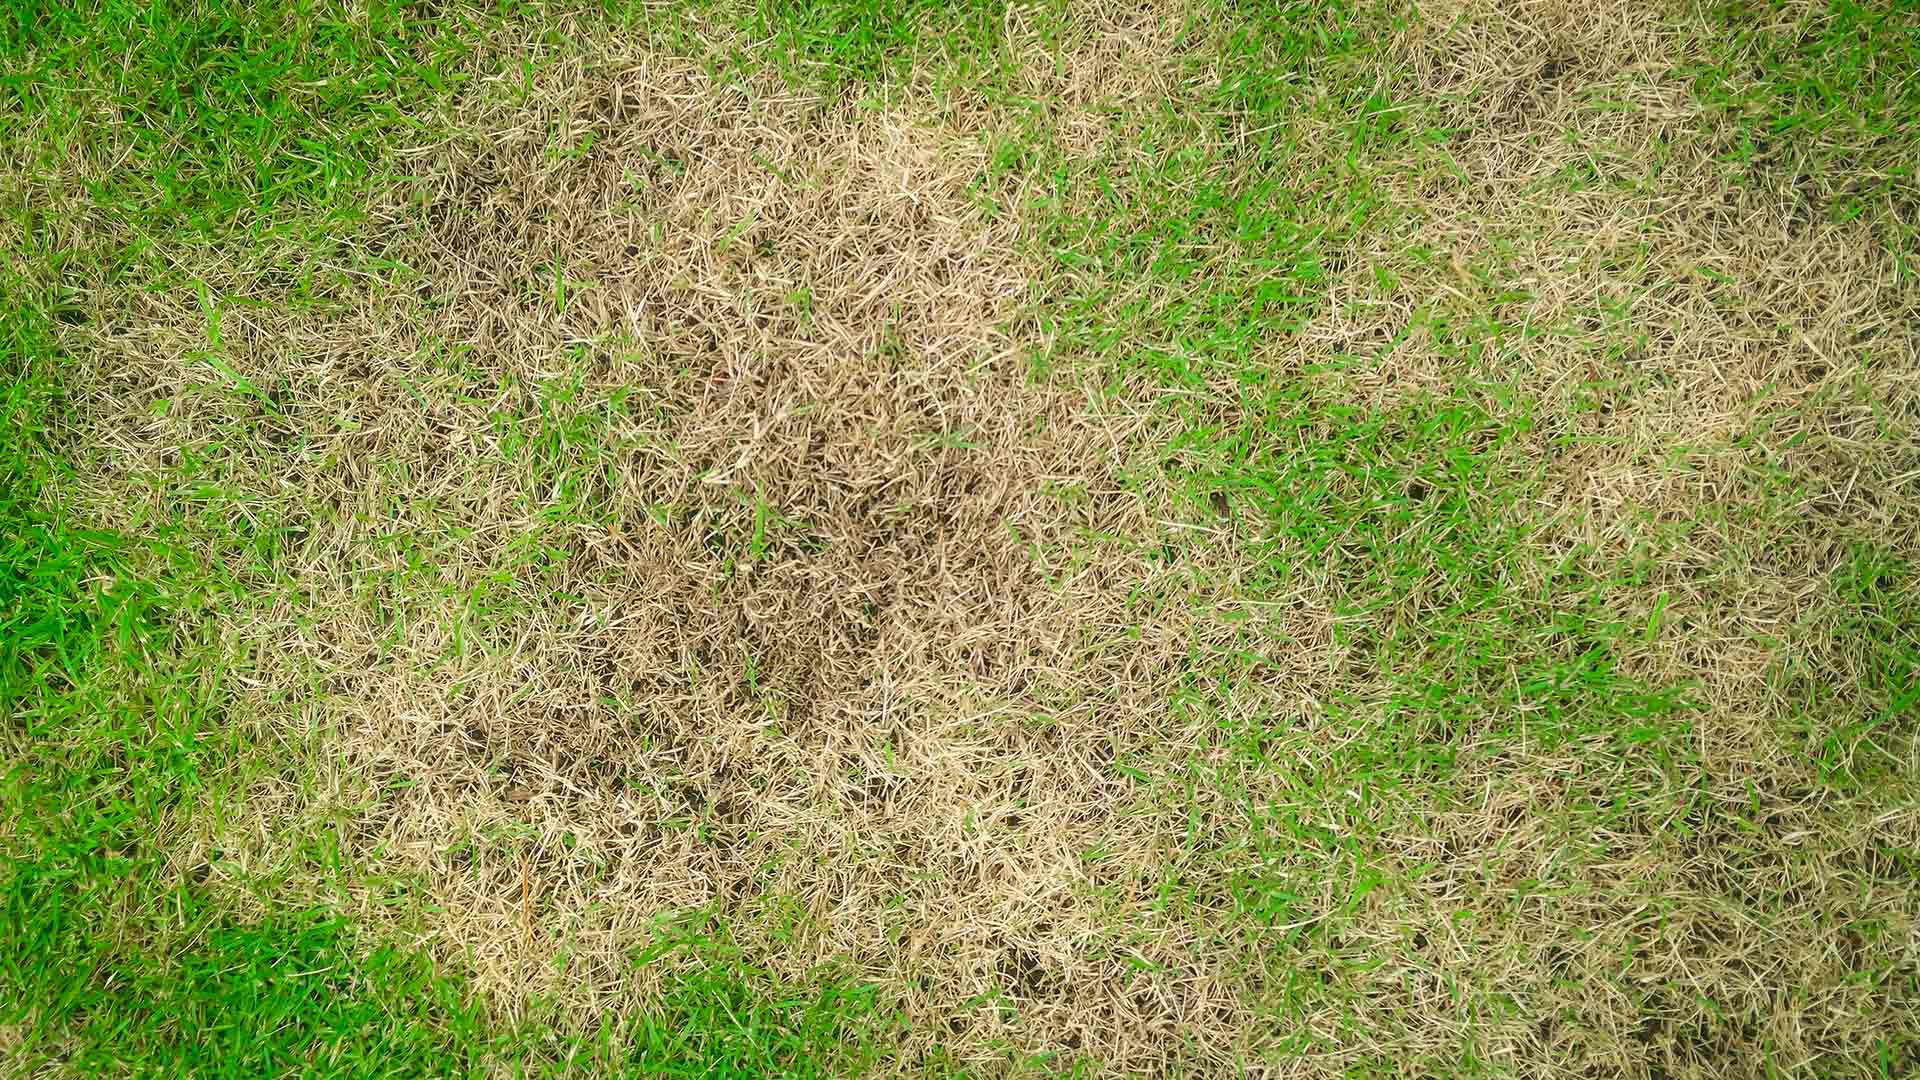 Do You Suspect Your Lawn Is Suffering From Brown Patch? Here’s What to Do